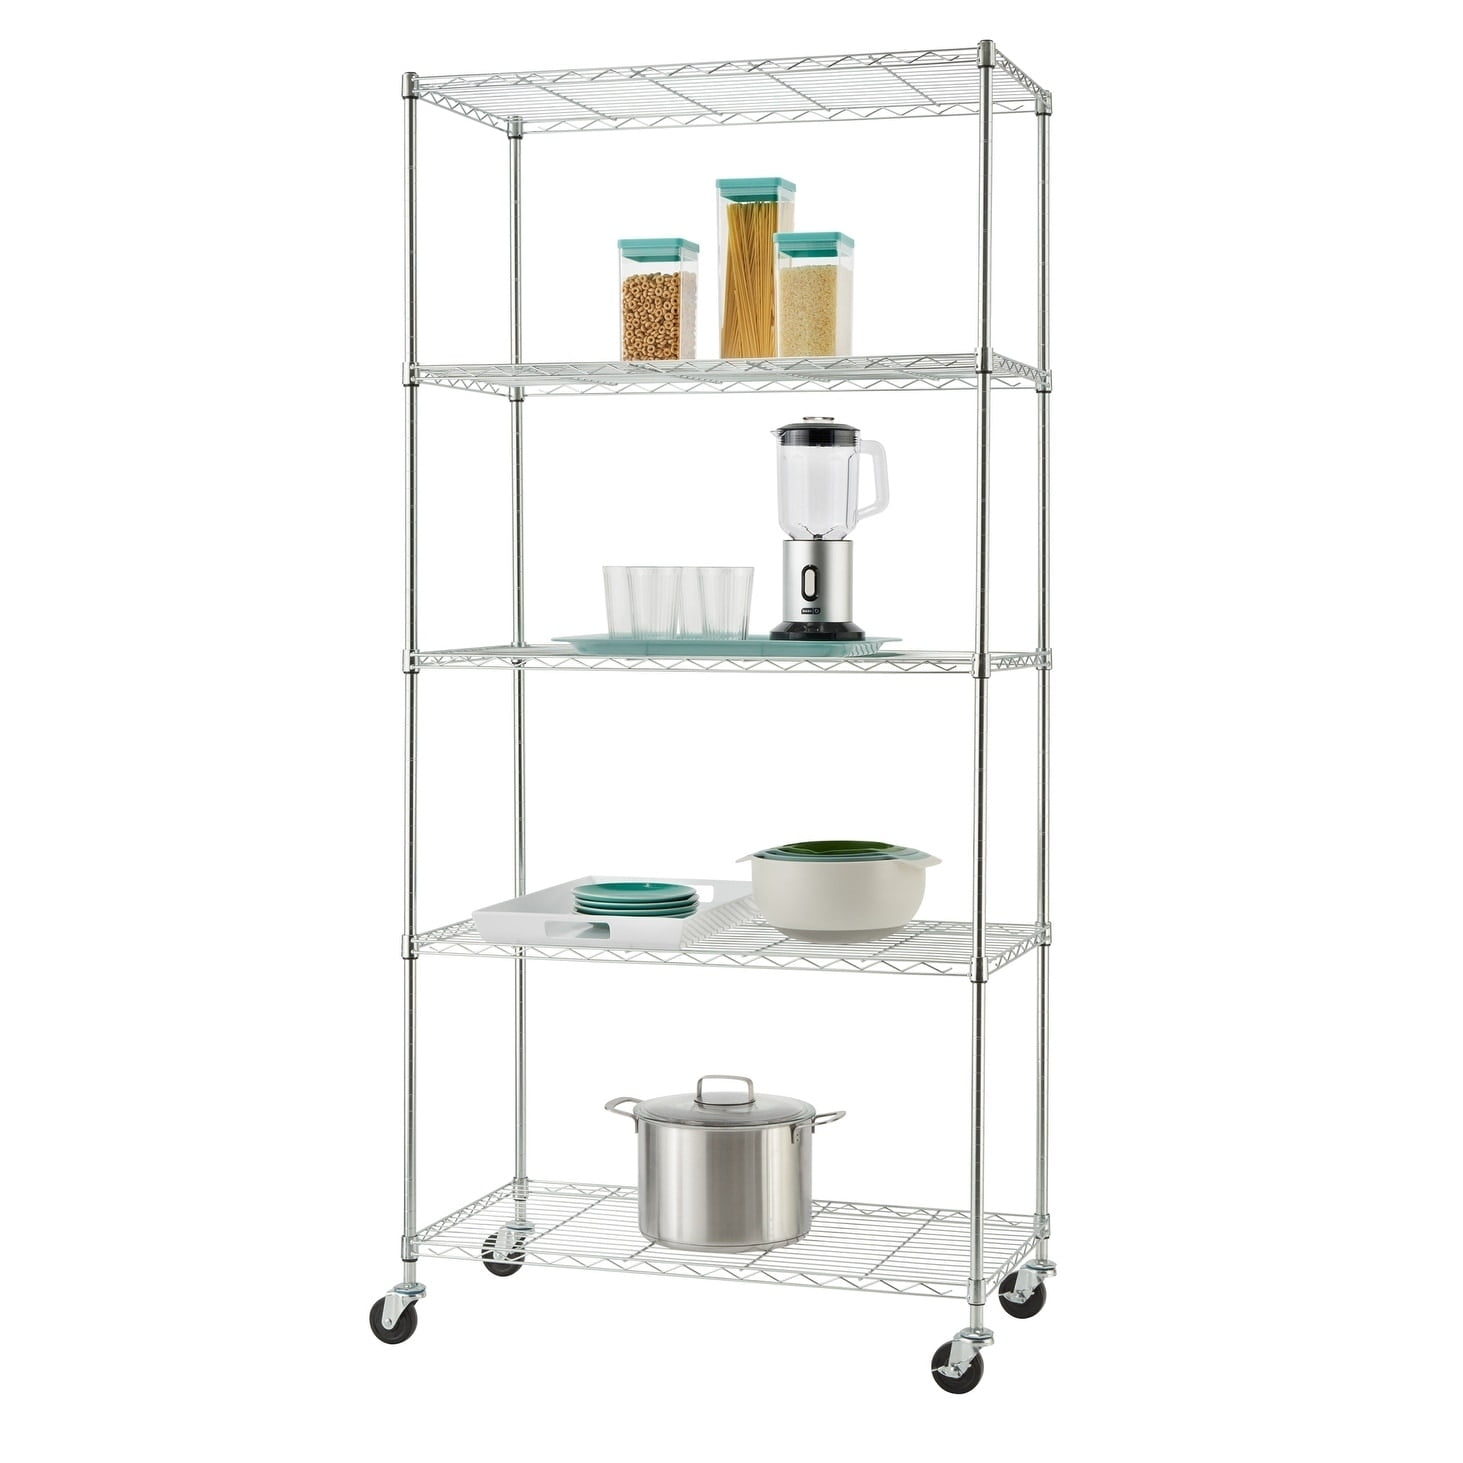 Perfect for Home Commercial NSF Chrome Wire 4-Shelf Kit with 96 inch. Posts 18 inch. Kitchen Storage inch. Cabinet Shelf Organizer Garage x 72 